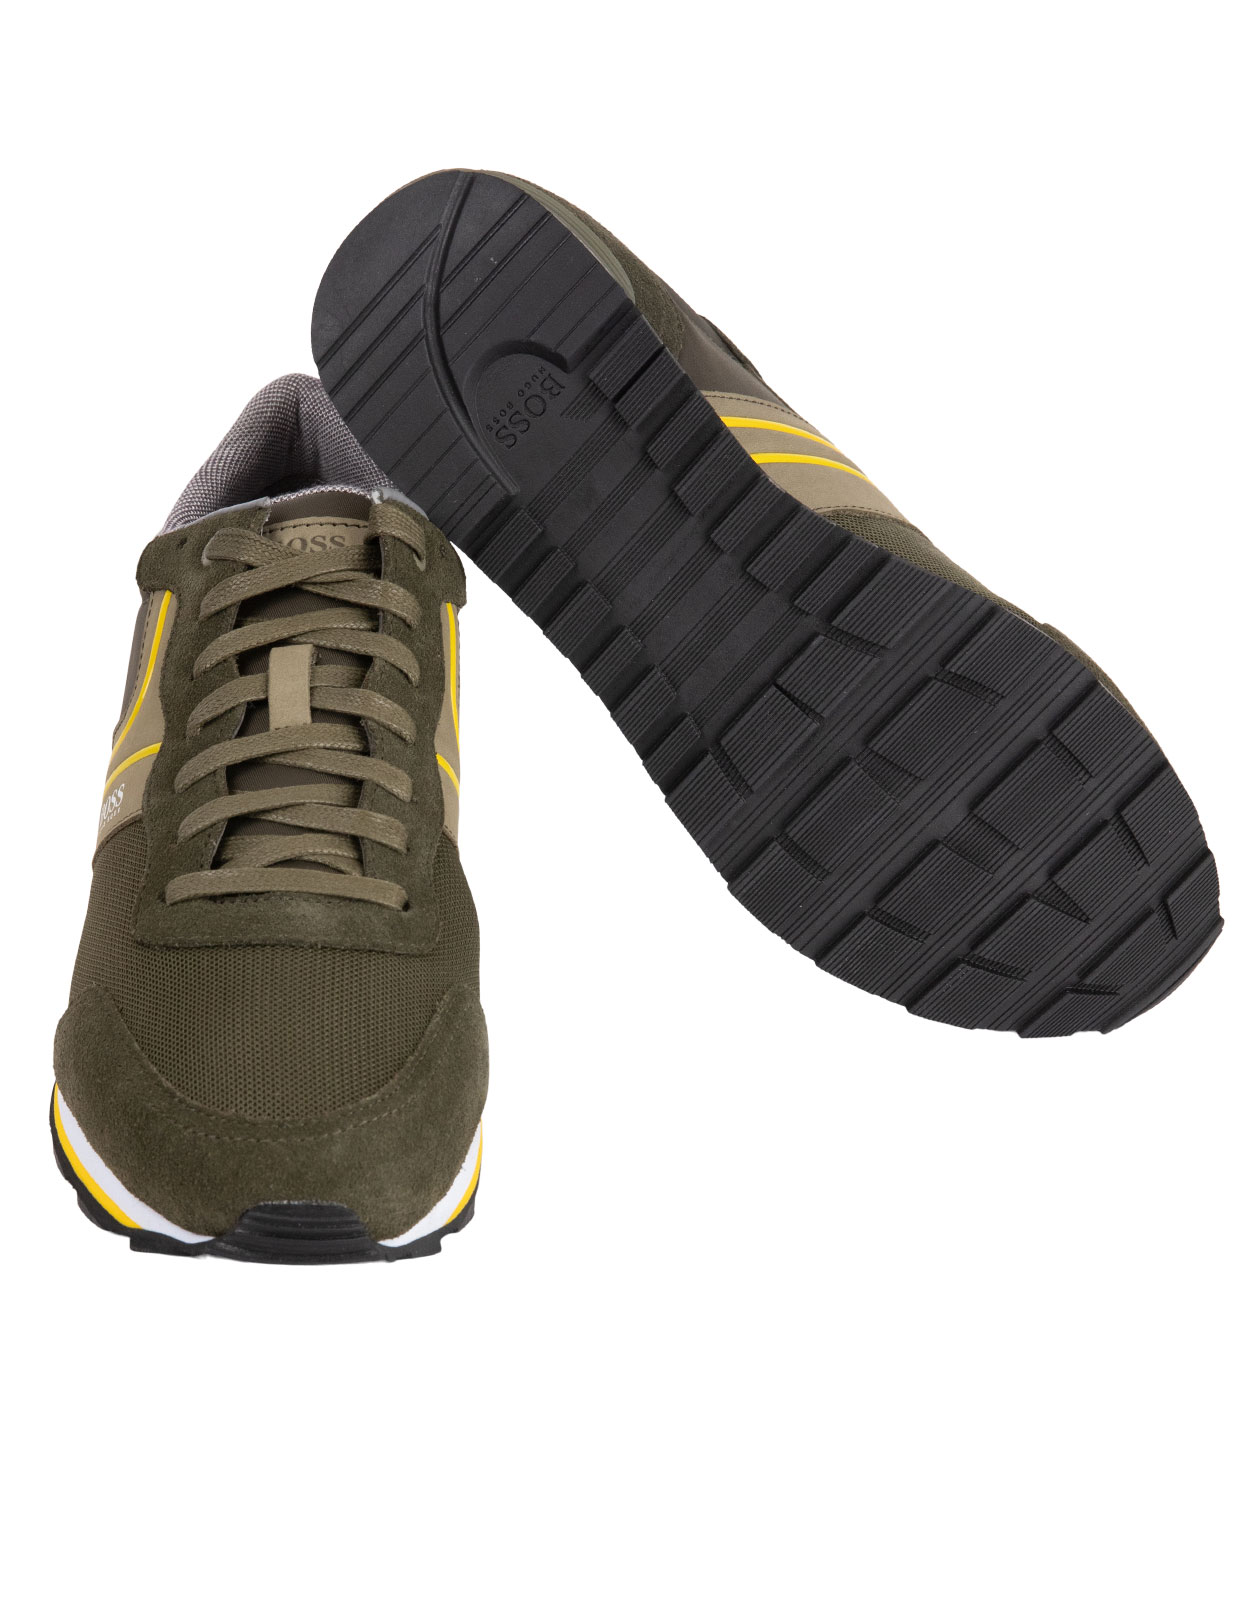 Running Style Trainers Suede Mesh Open Green Stl 40